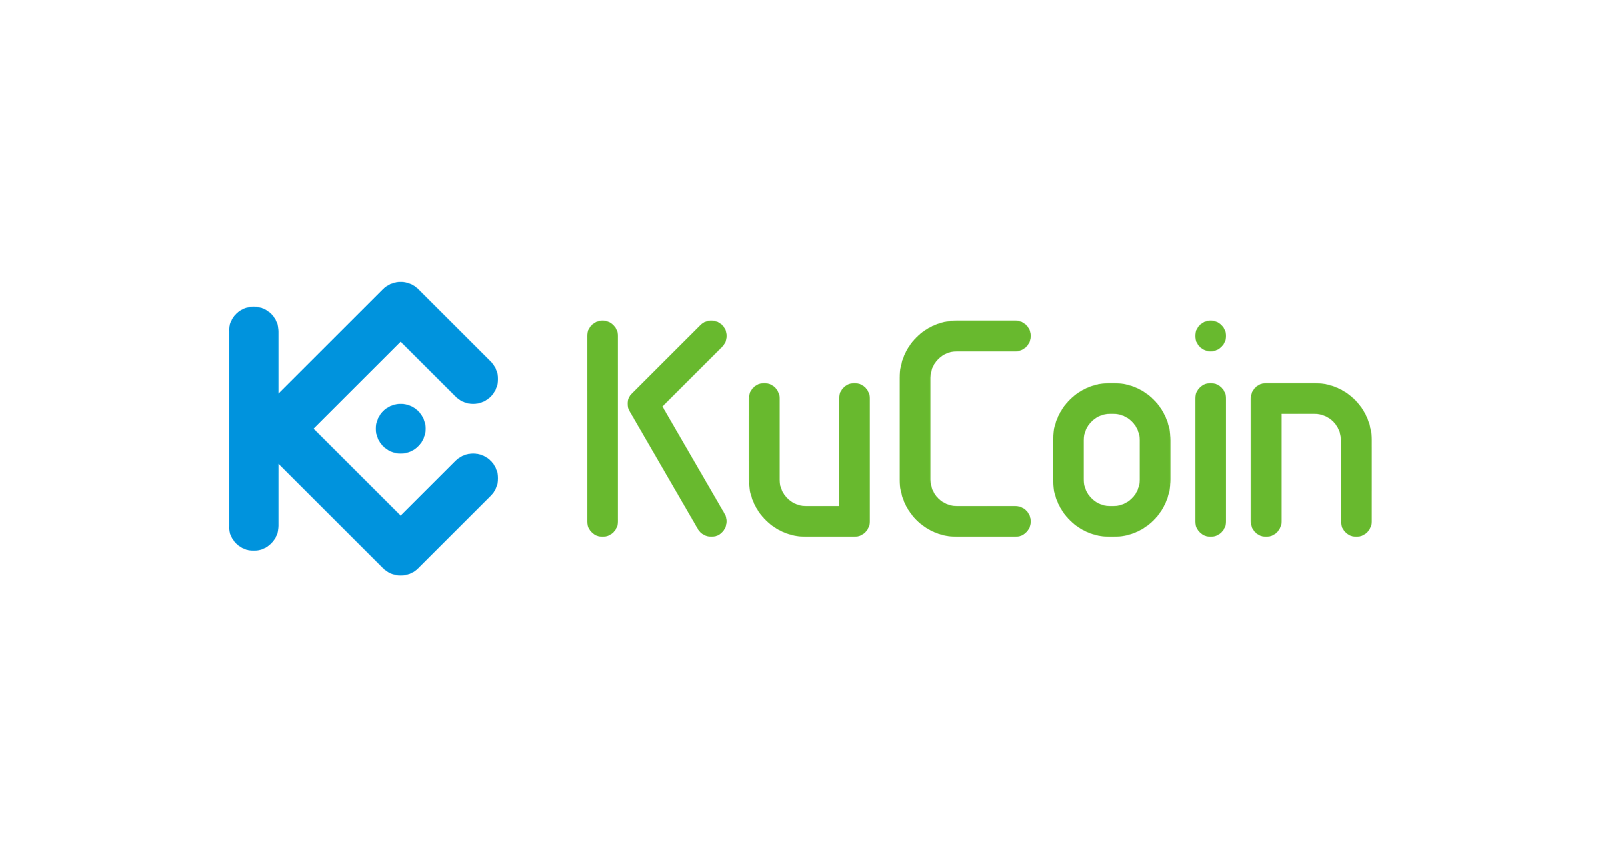 How To Transfer Bitcoin From Kucoin To Coinbase